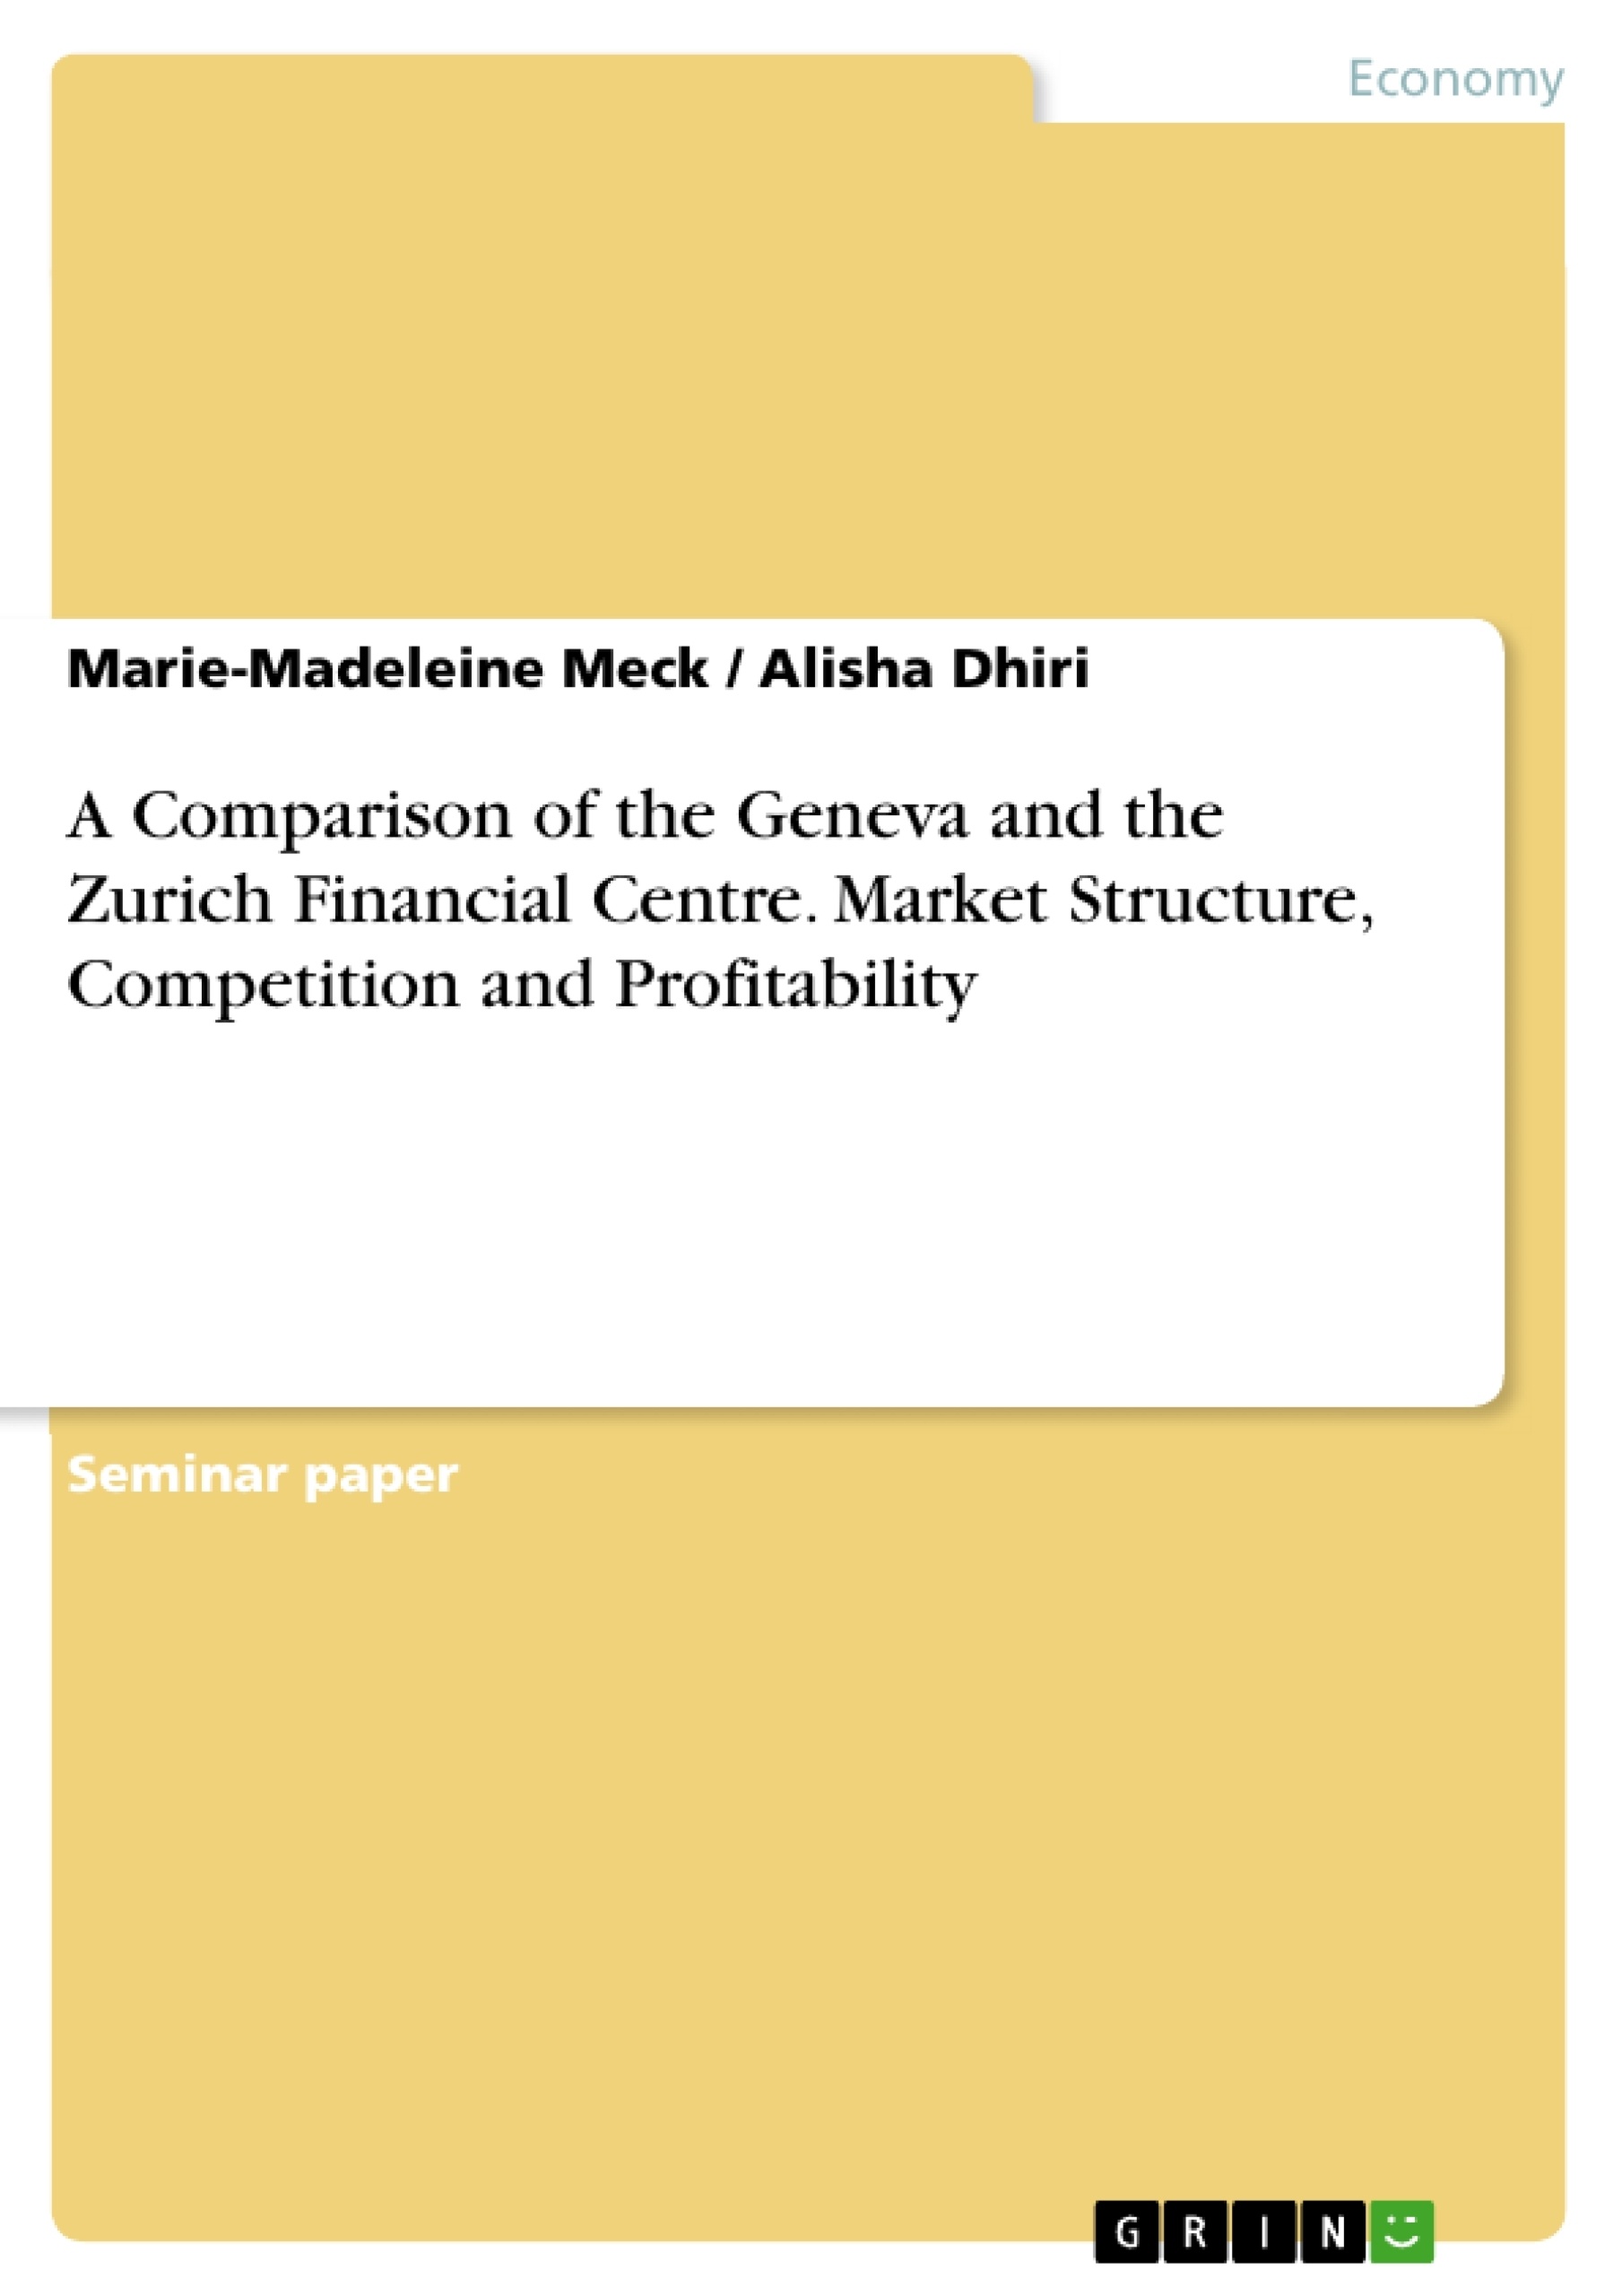 Title: A Comparison of the Geneva and the Zurich Financial Centre. Market Structure, Competition and Profitability